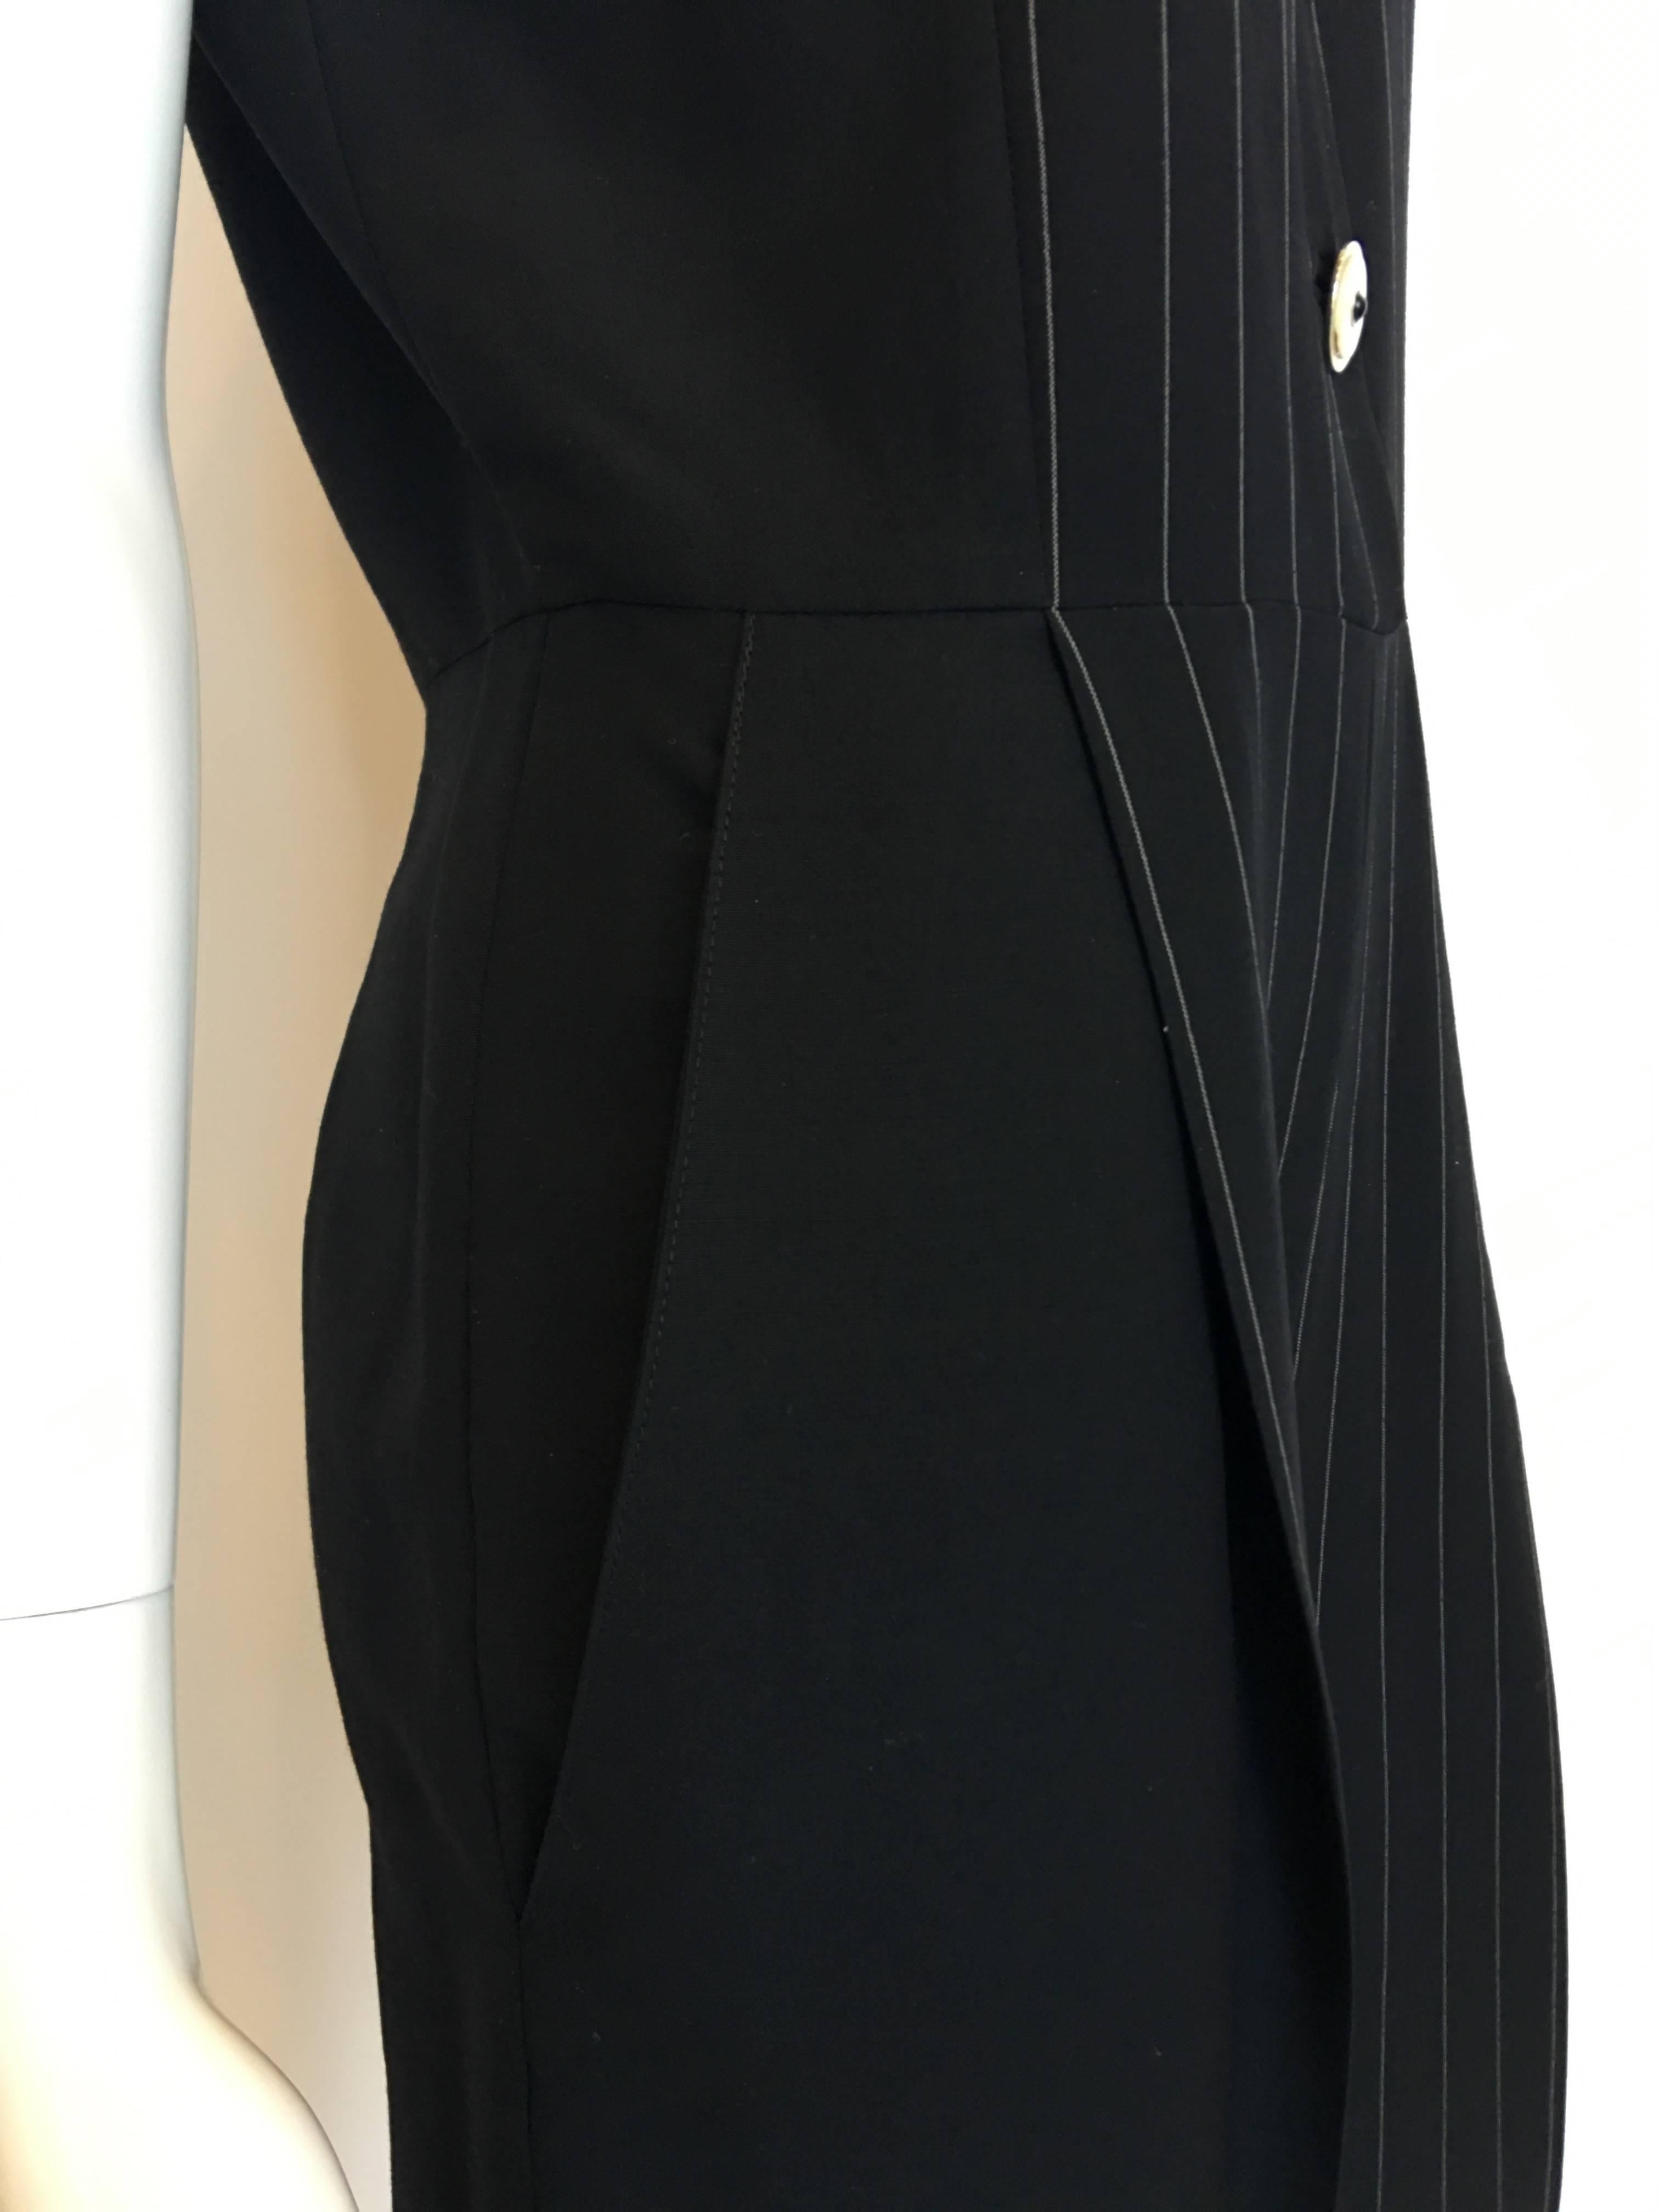 Gianni Versace Couture 1980's Jumpsuit In Good Condition For Sale In Los Angeles, CA